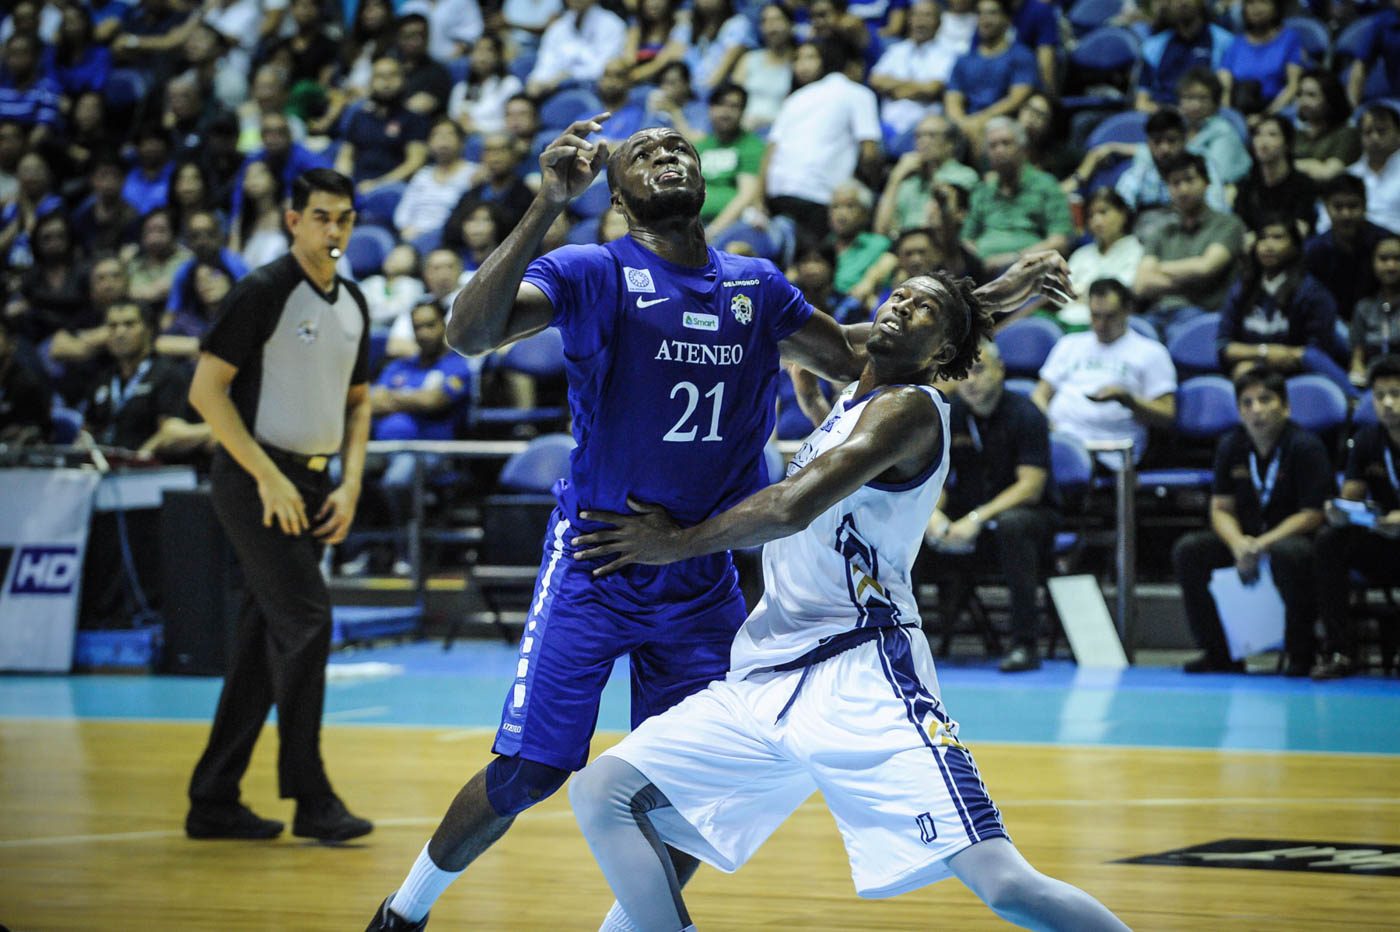 UAAP Weekly wRap – Ateneo’s Ikeh, La Salle show off ahead of anticipated clash